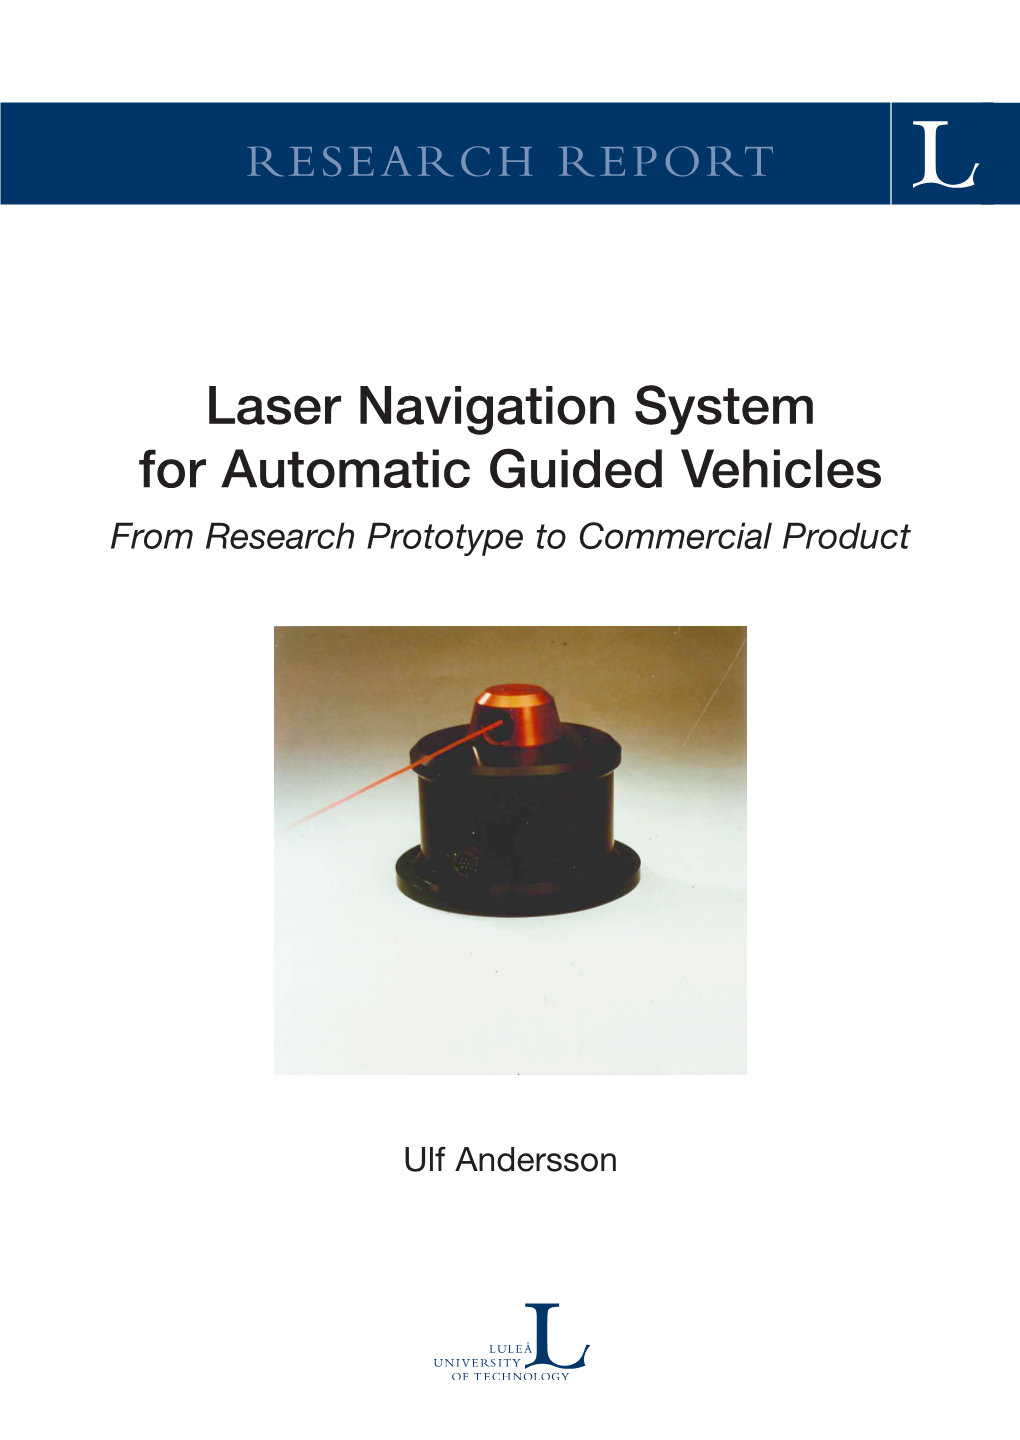 Laser Navigation System for Automatic Guided Vehicles